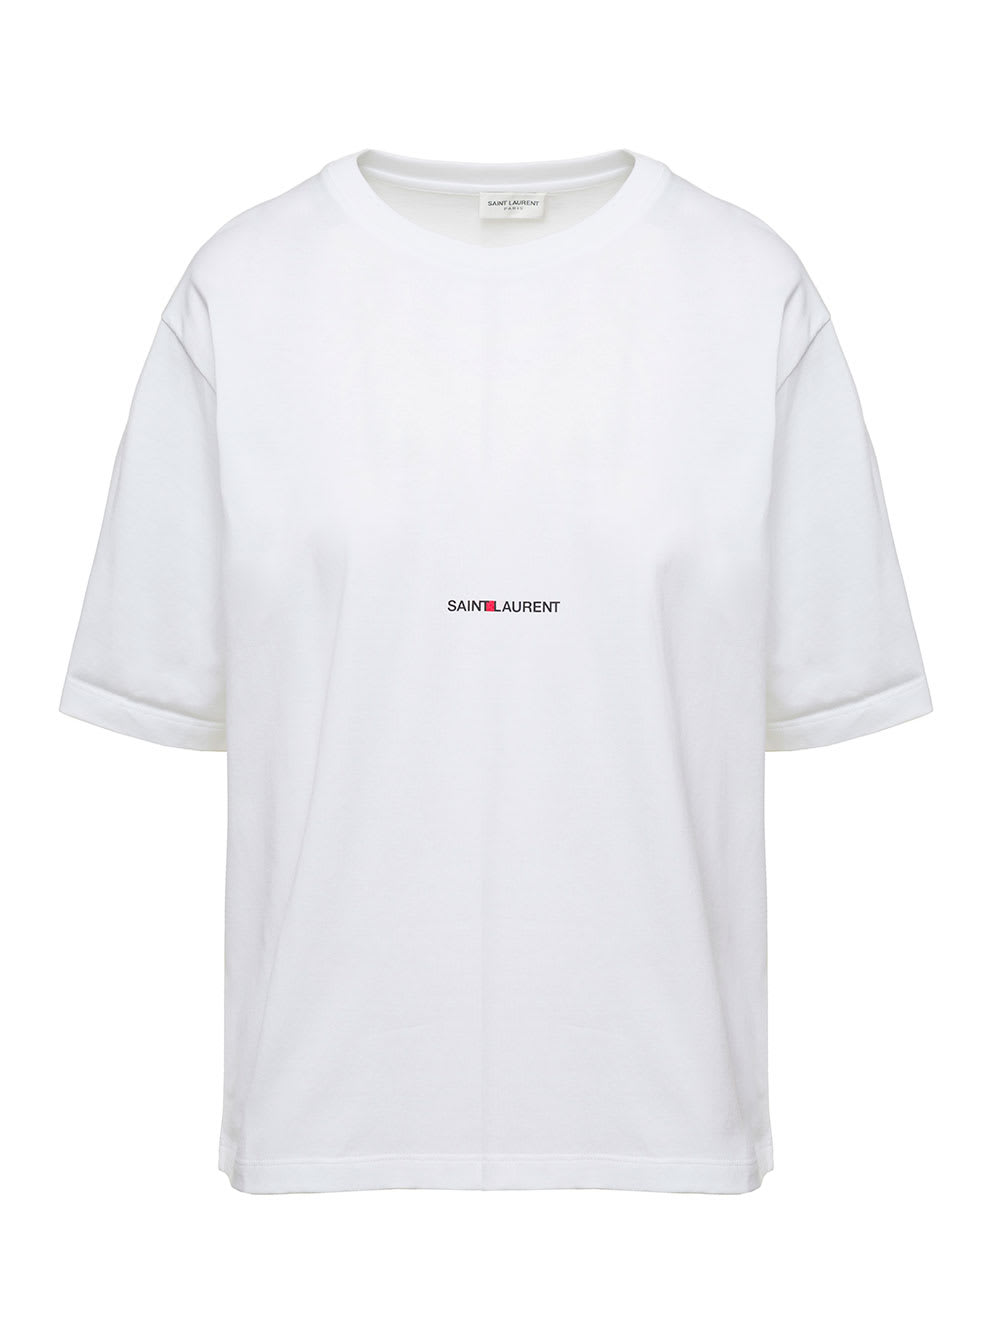 Saint Laurent Basic White T-shirt With Miiddle Logo Print In Cotton Woman